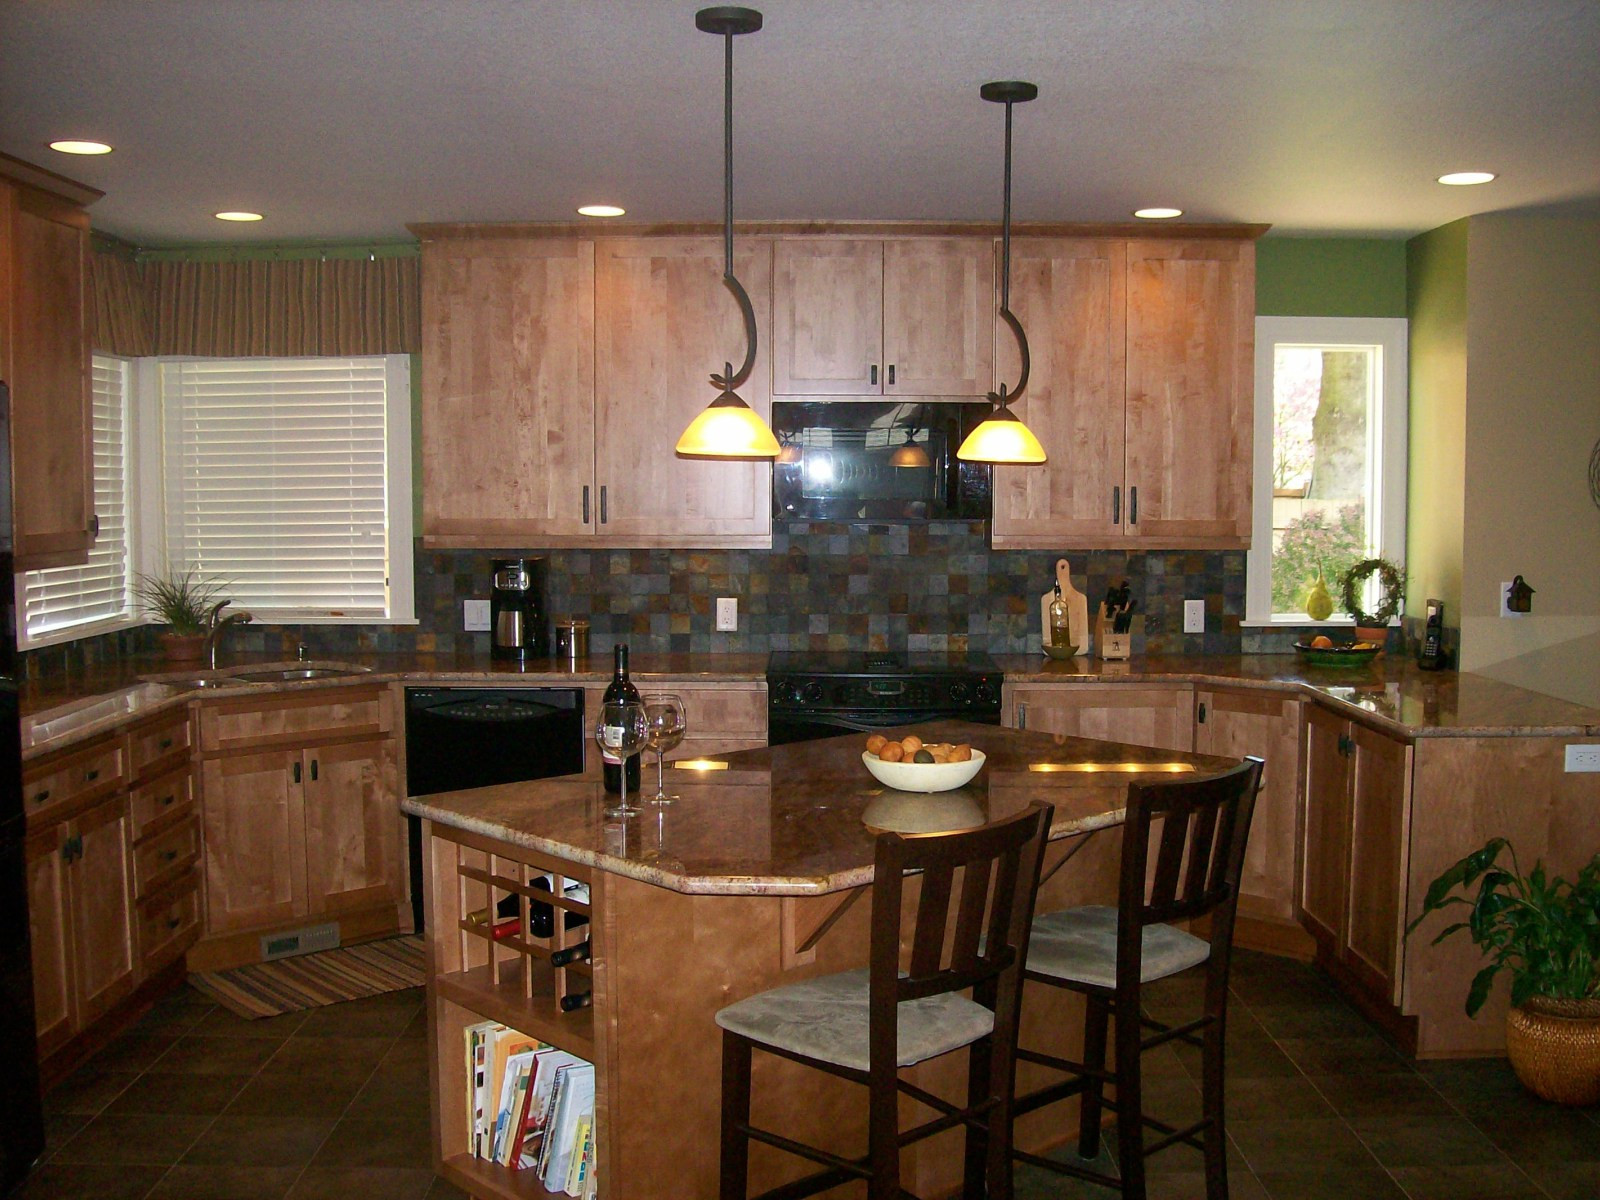 Kitchen Remodeling Photo
 Kitchen Remodeled Kitchens For Your Next